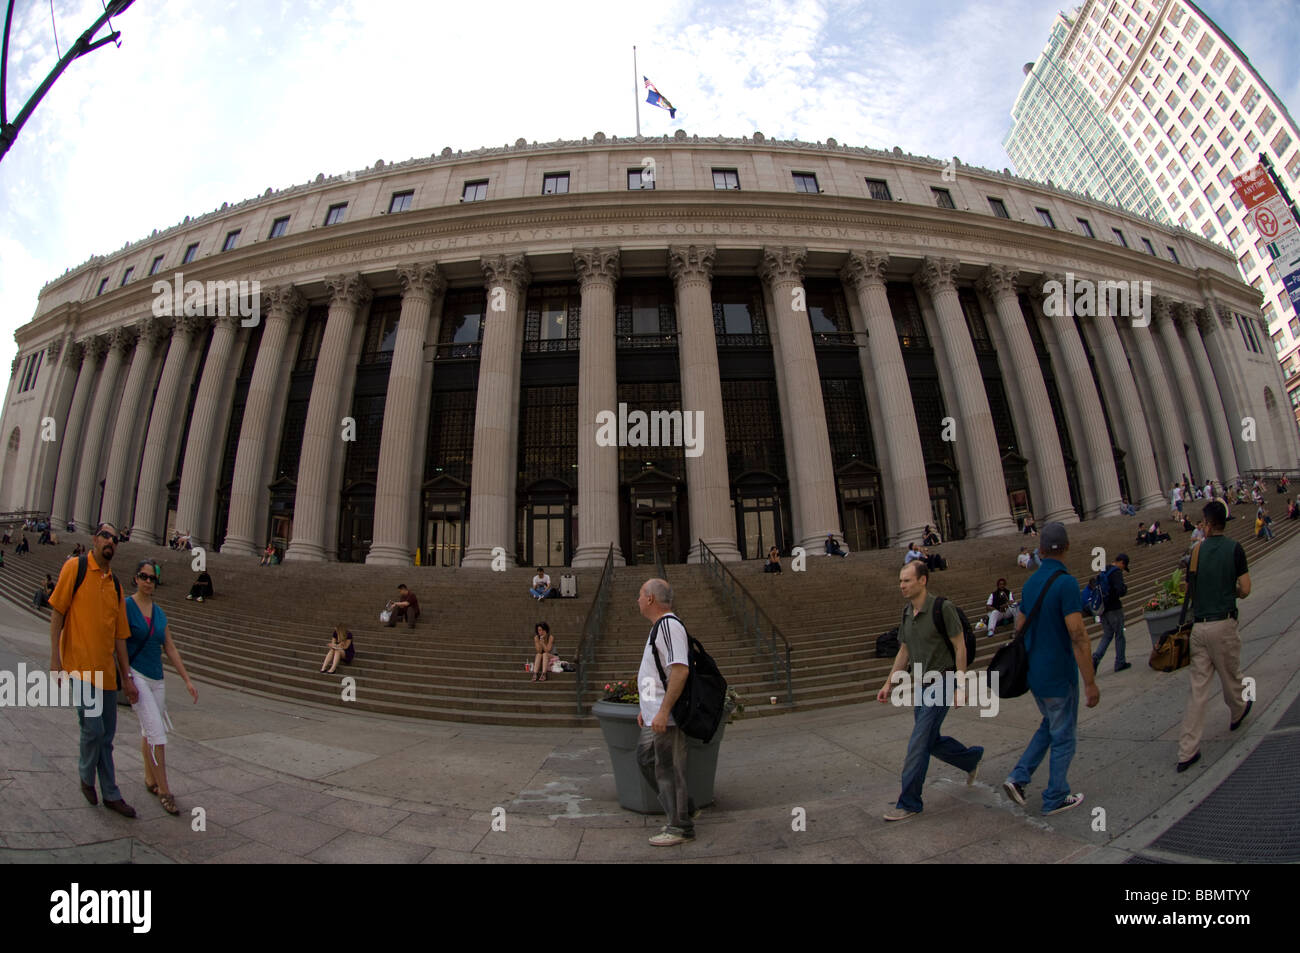 The James Farley Post Office  in New York on Friday May 22 2009 Frances M Roberts Stock Photo